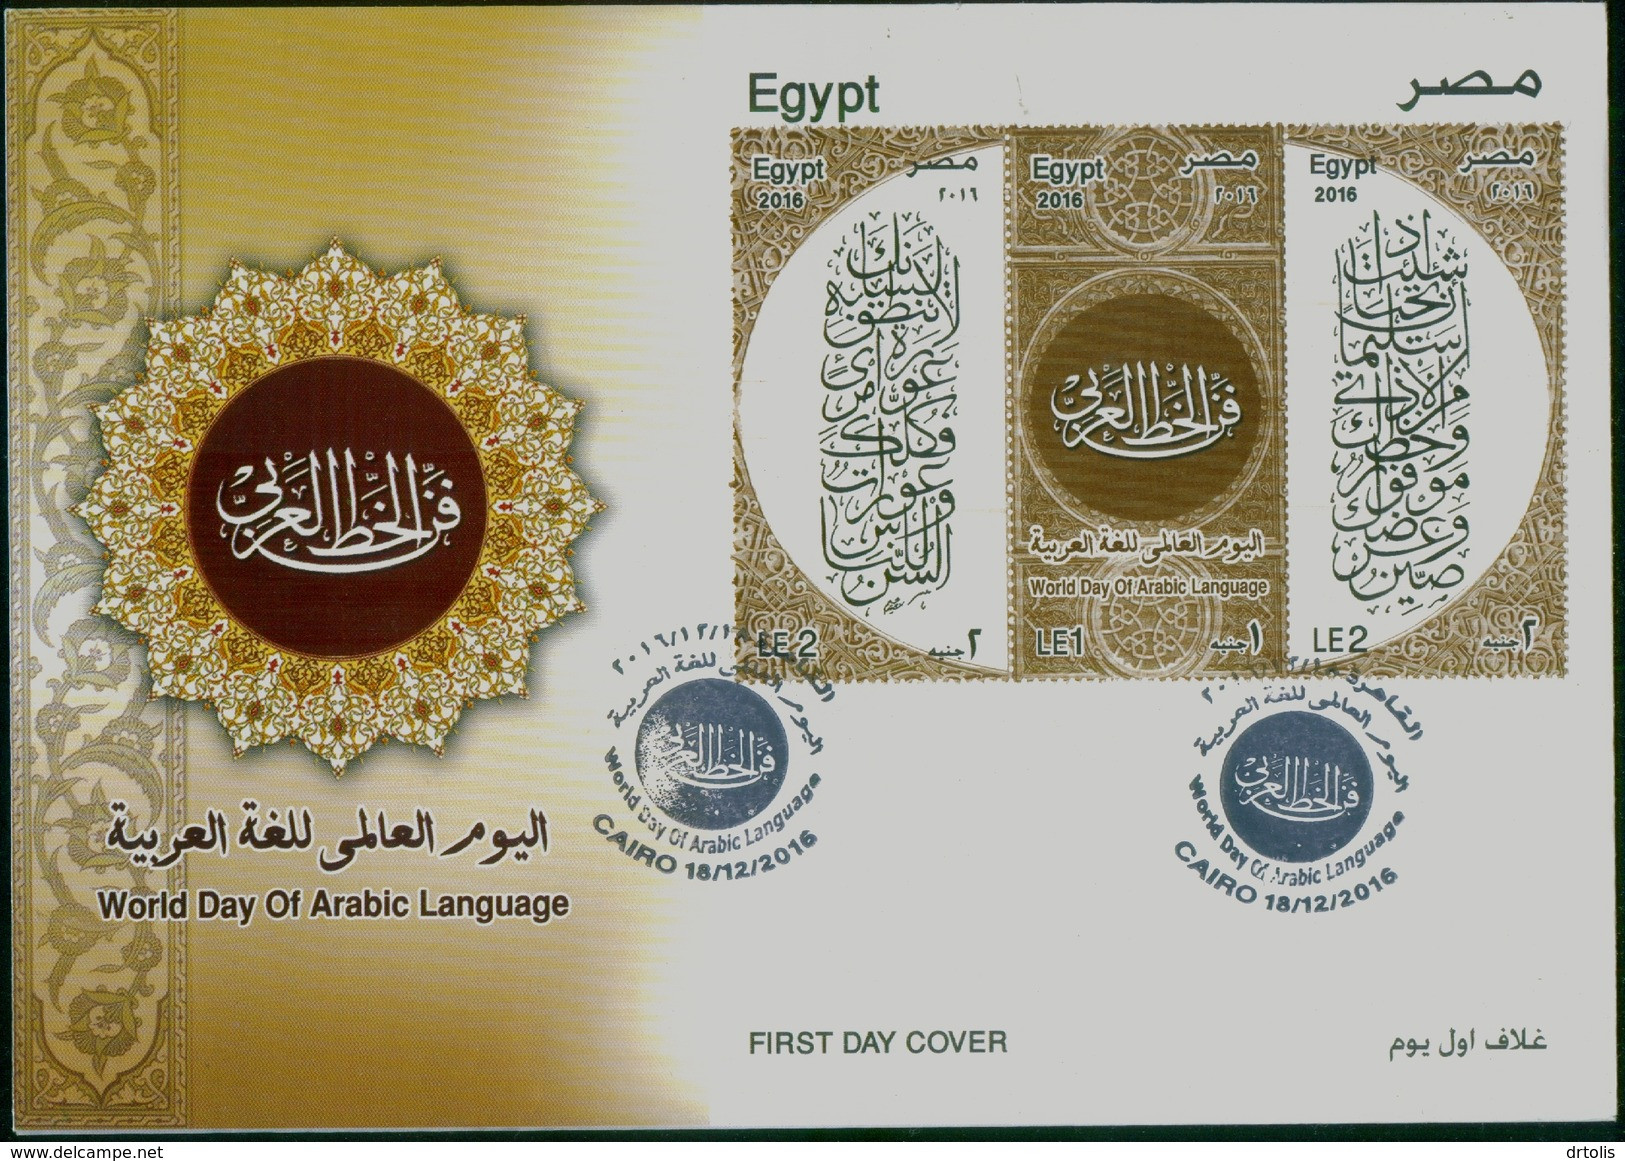 EGYPT / 2016 / WORLD DAY OF ARABIC LANGUAGE / THE ART OF ARABIC CALLIGRAPHY / FDC - Covers & Documents